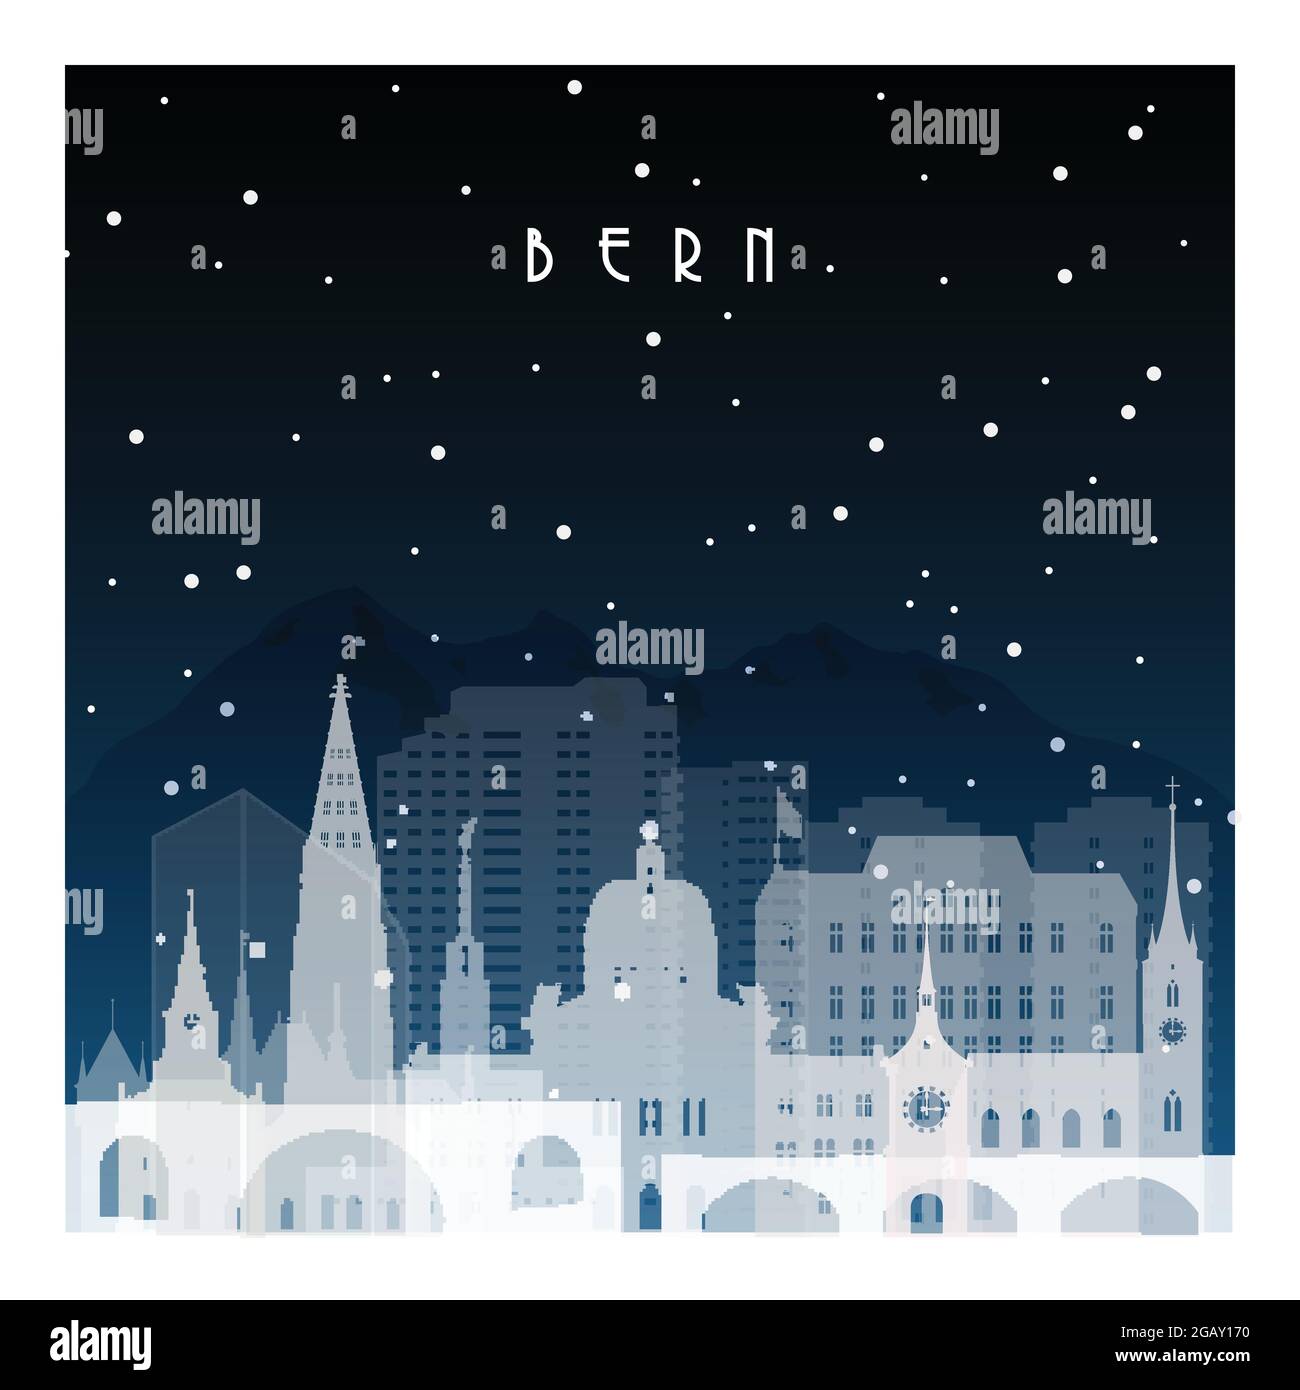 Winter night in Bern. Night city in flat style for banner, poster, illustration, background. Stock Vector